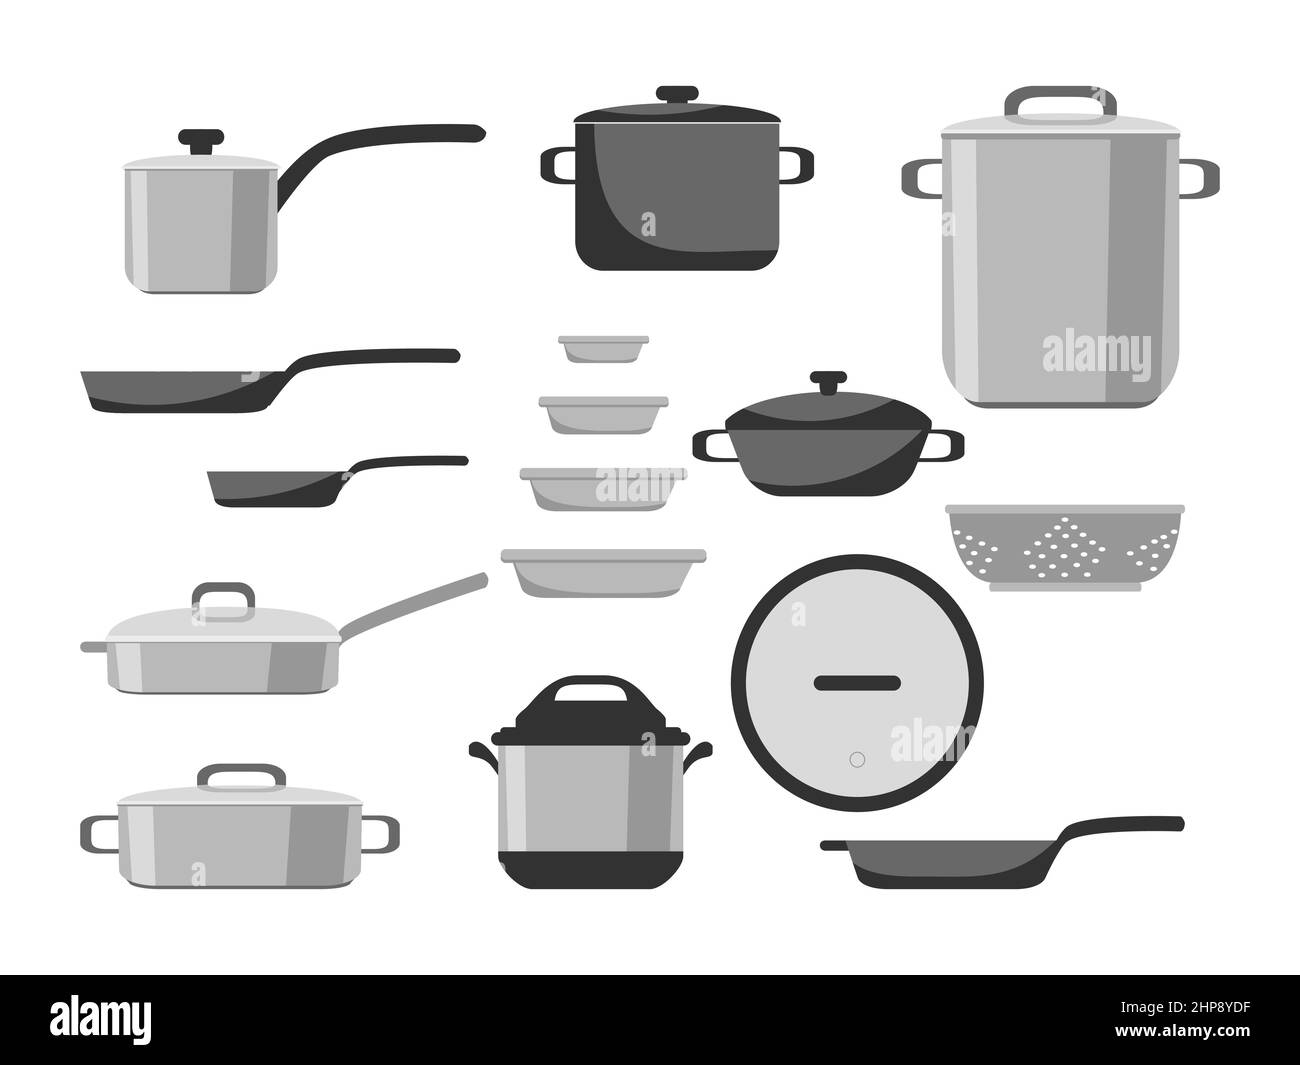 Cartoon stainless and non-stick cookware set, pots, pans, saucepans and utensils tools cooking isolated on white background, vector illustration. Kitchen icons objects elements for boiling and frying Stock Vector